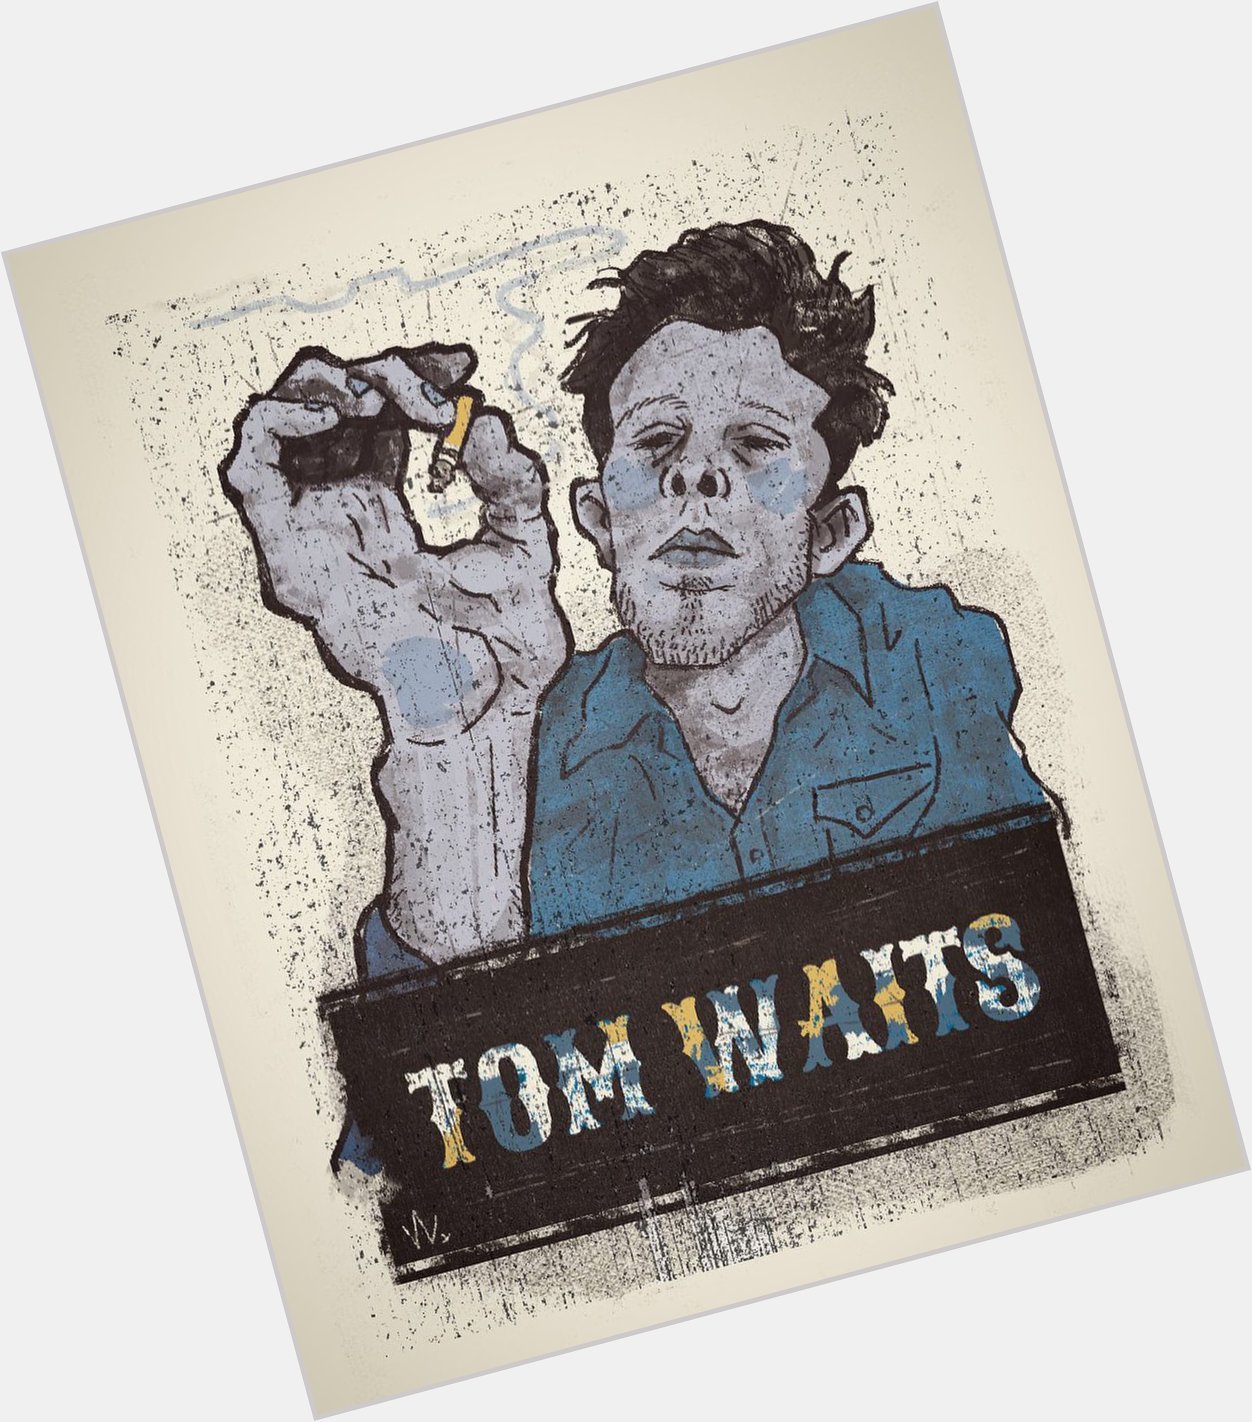 A heartfelt happy birthday to Mr. Tom Waits. May your day be full of hotels and whiskey and sad-luck dames. 